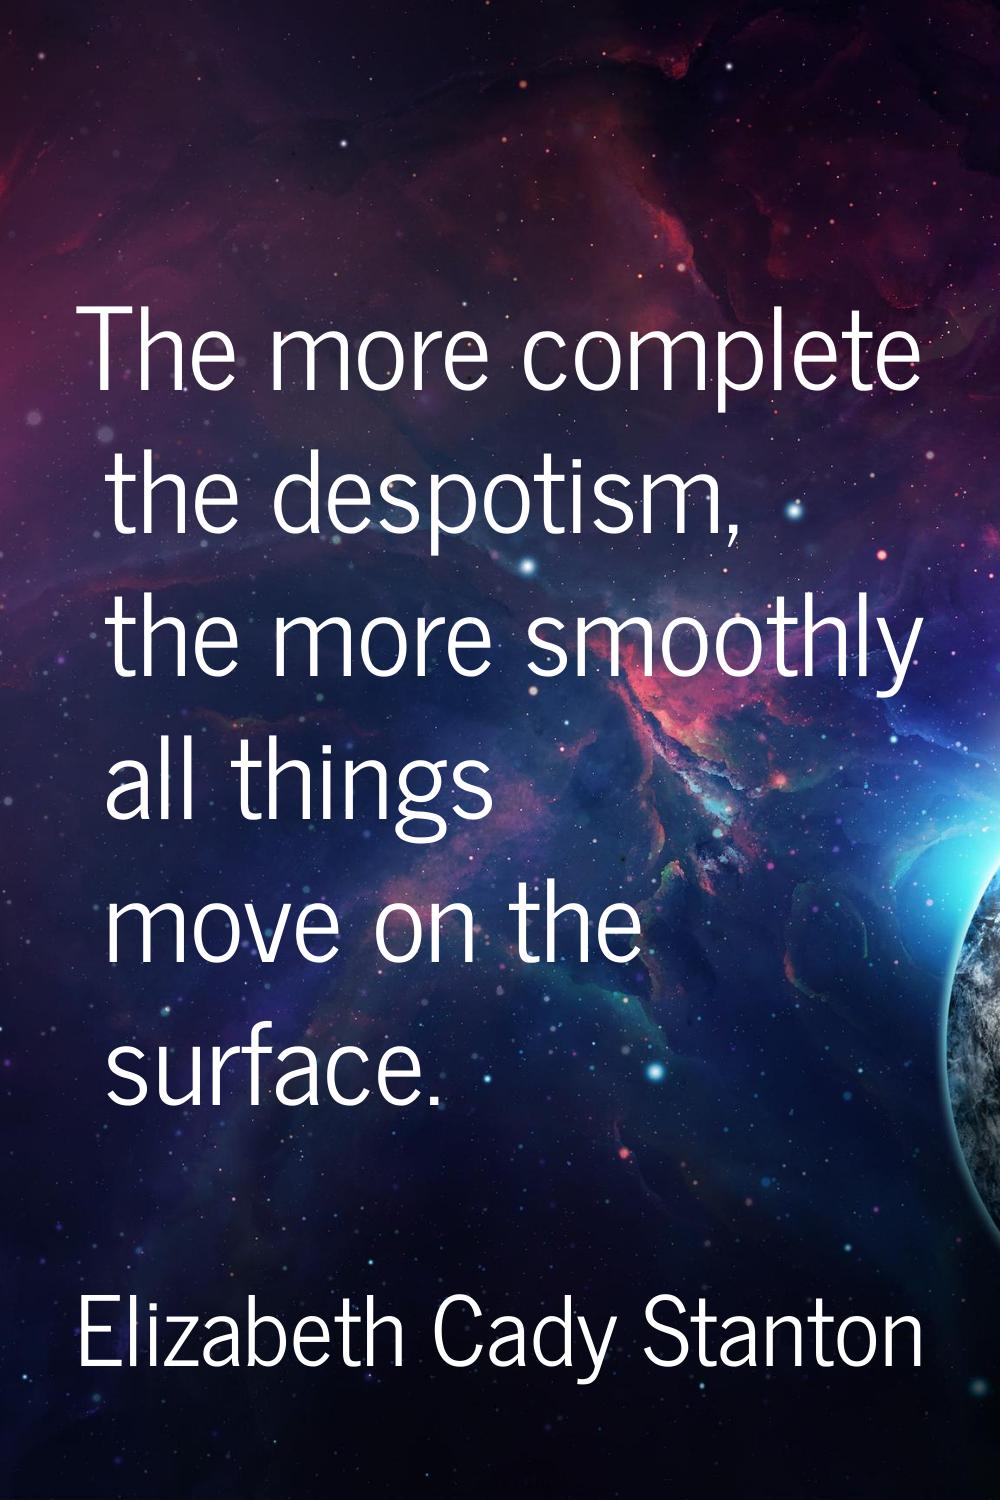 The more complete the despotism, the more smoothly all things move on the surface.